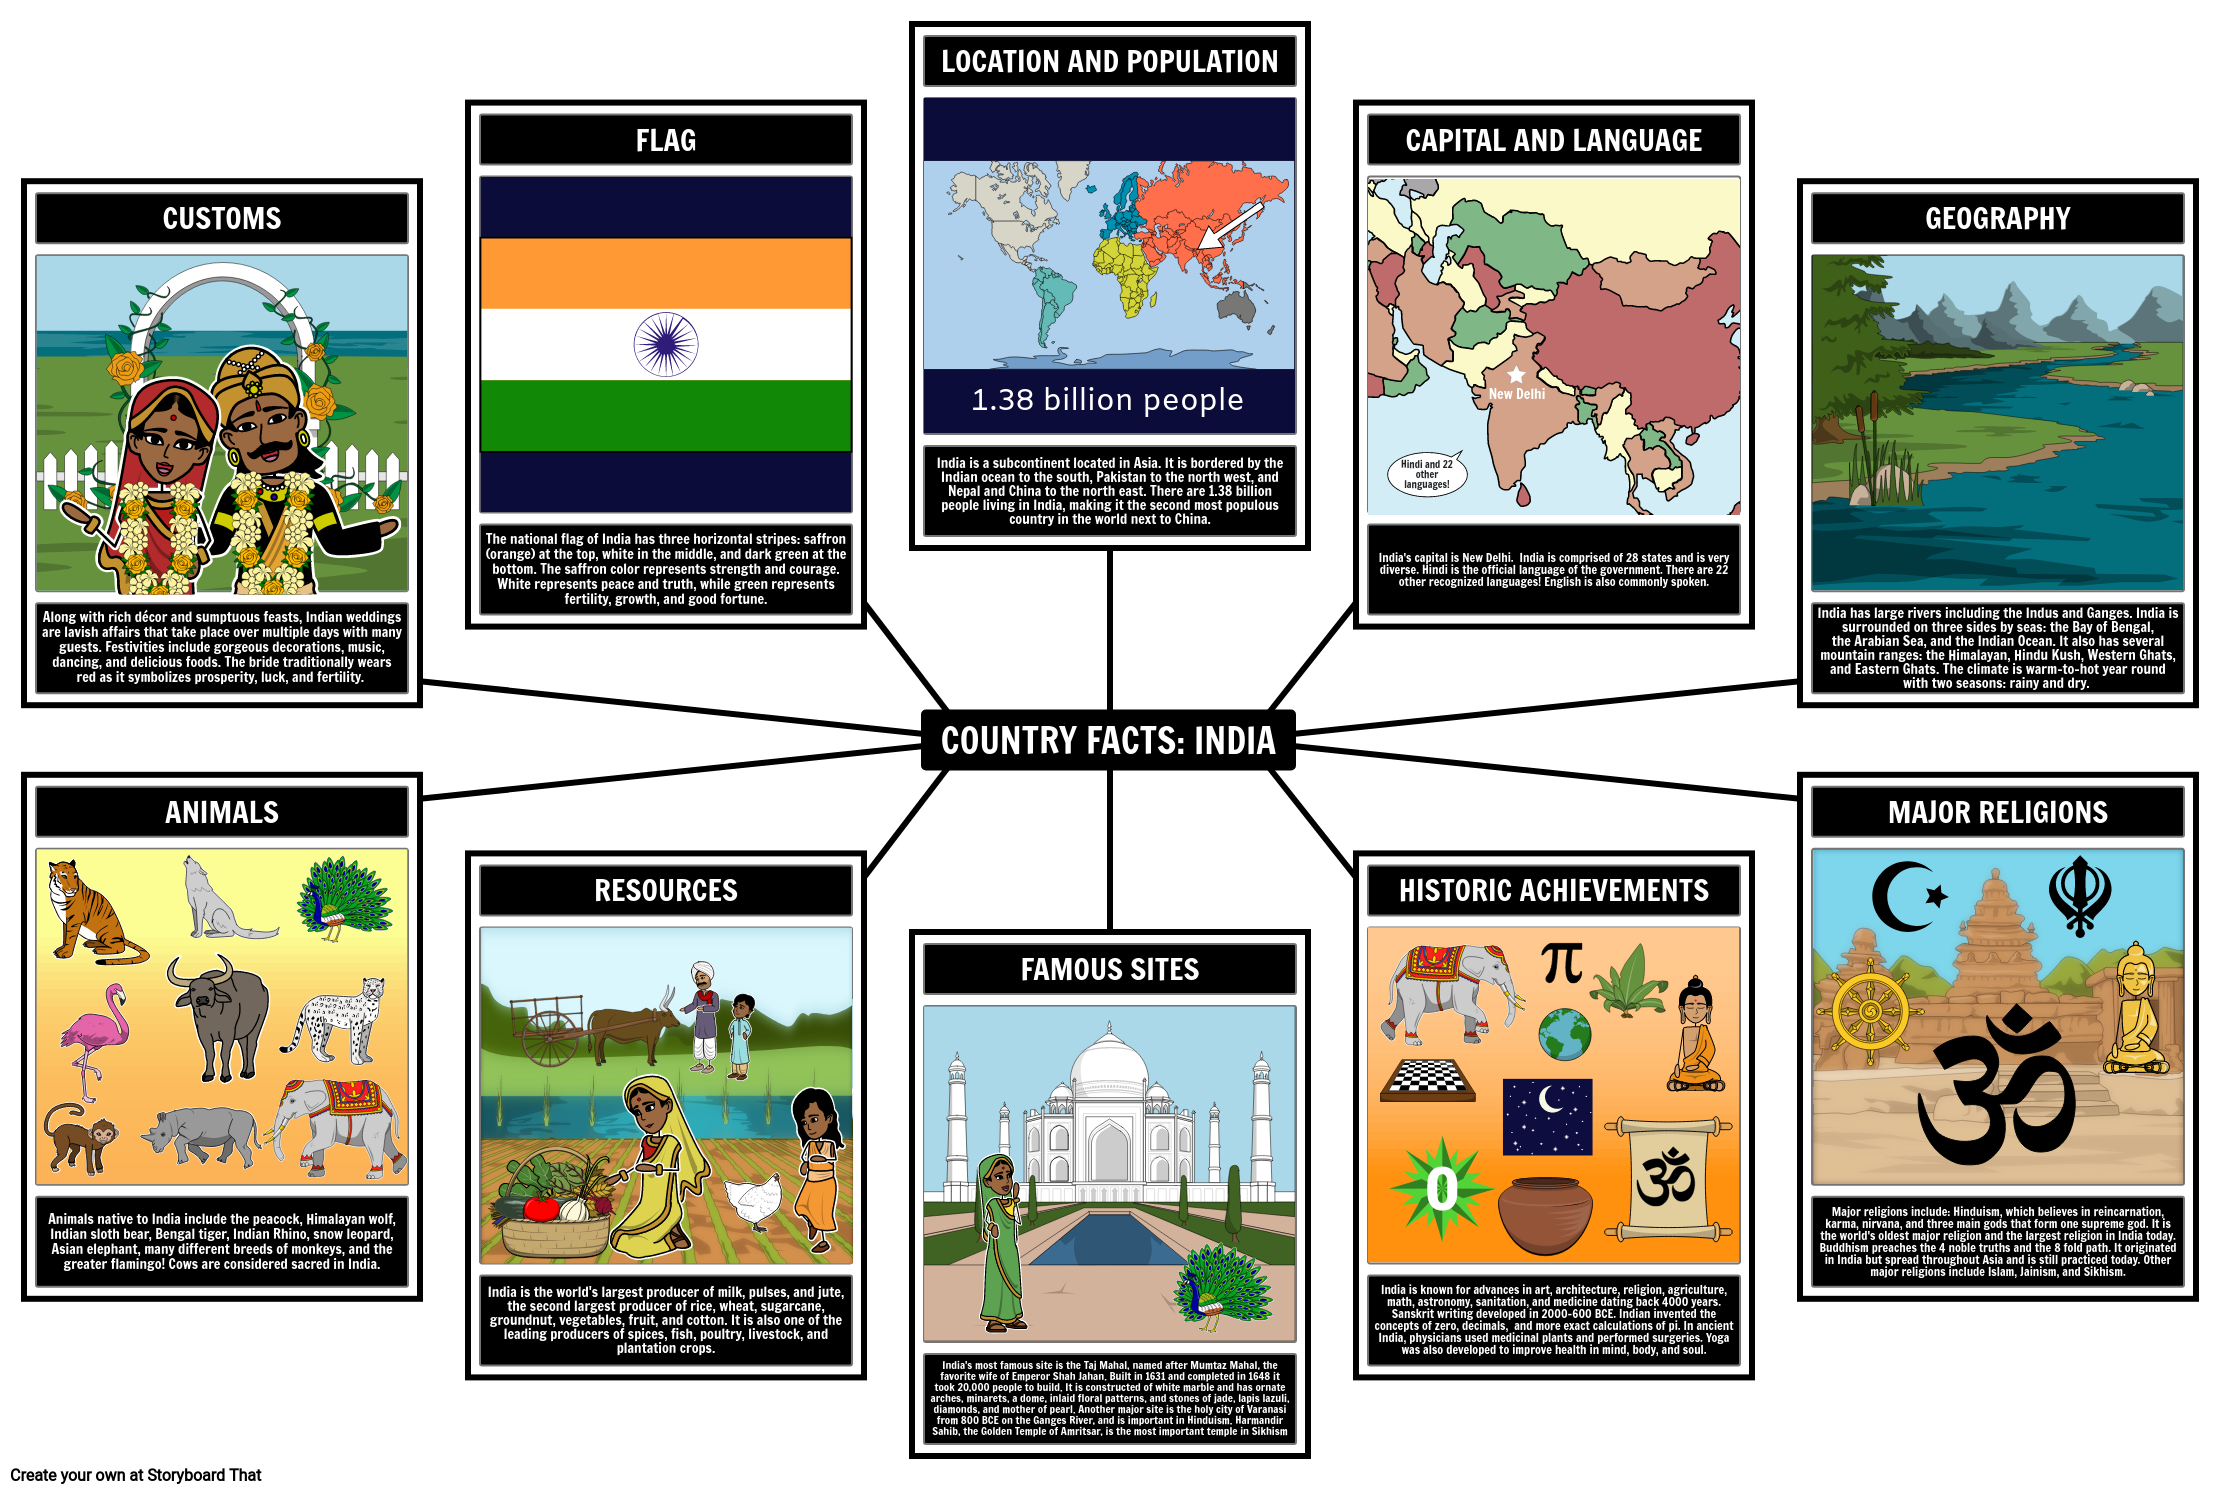 Country Facts: India